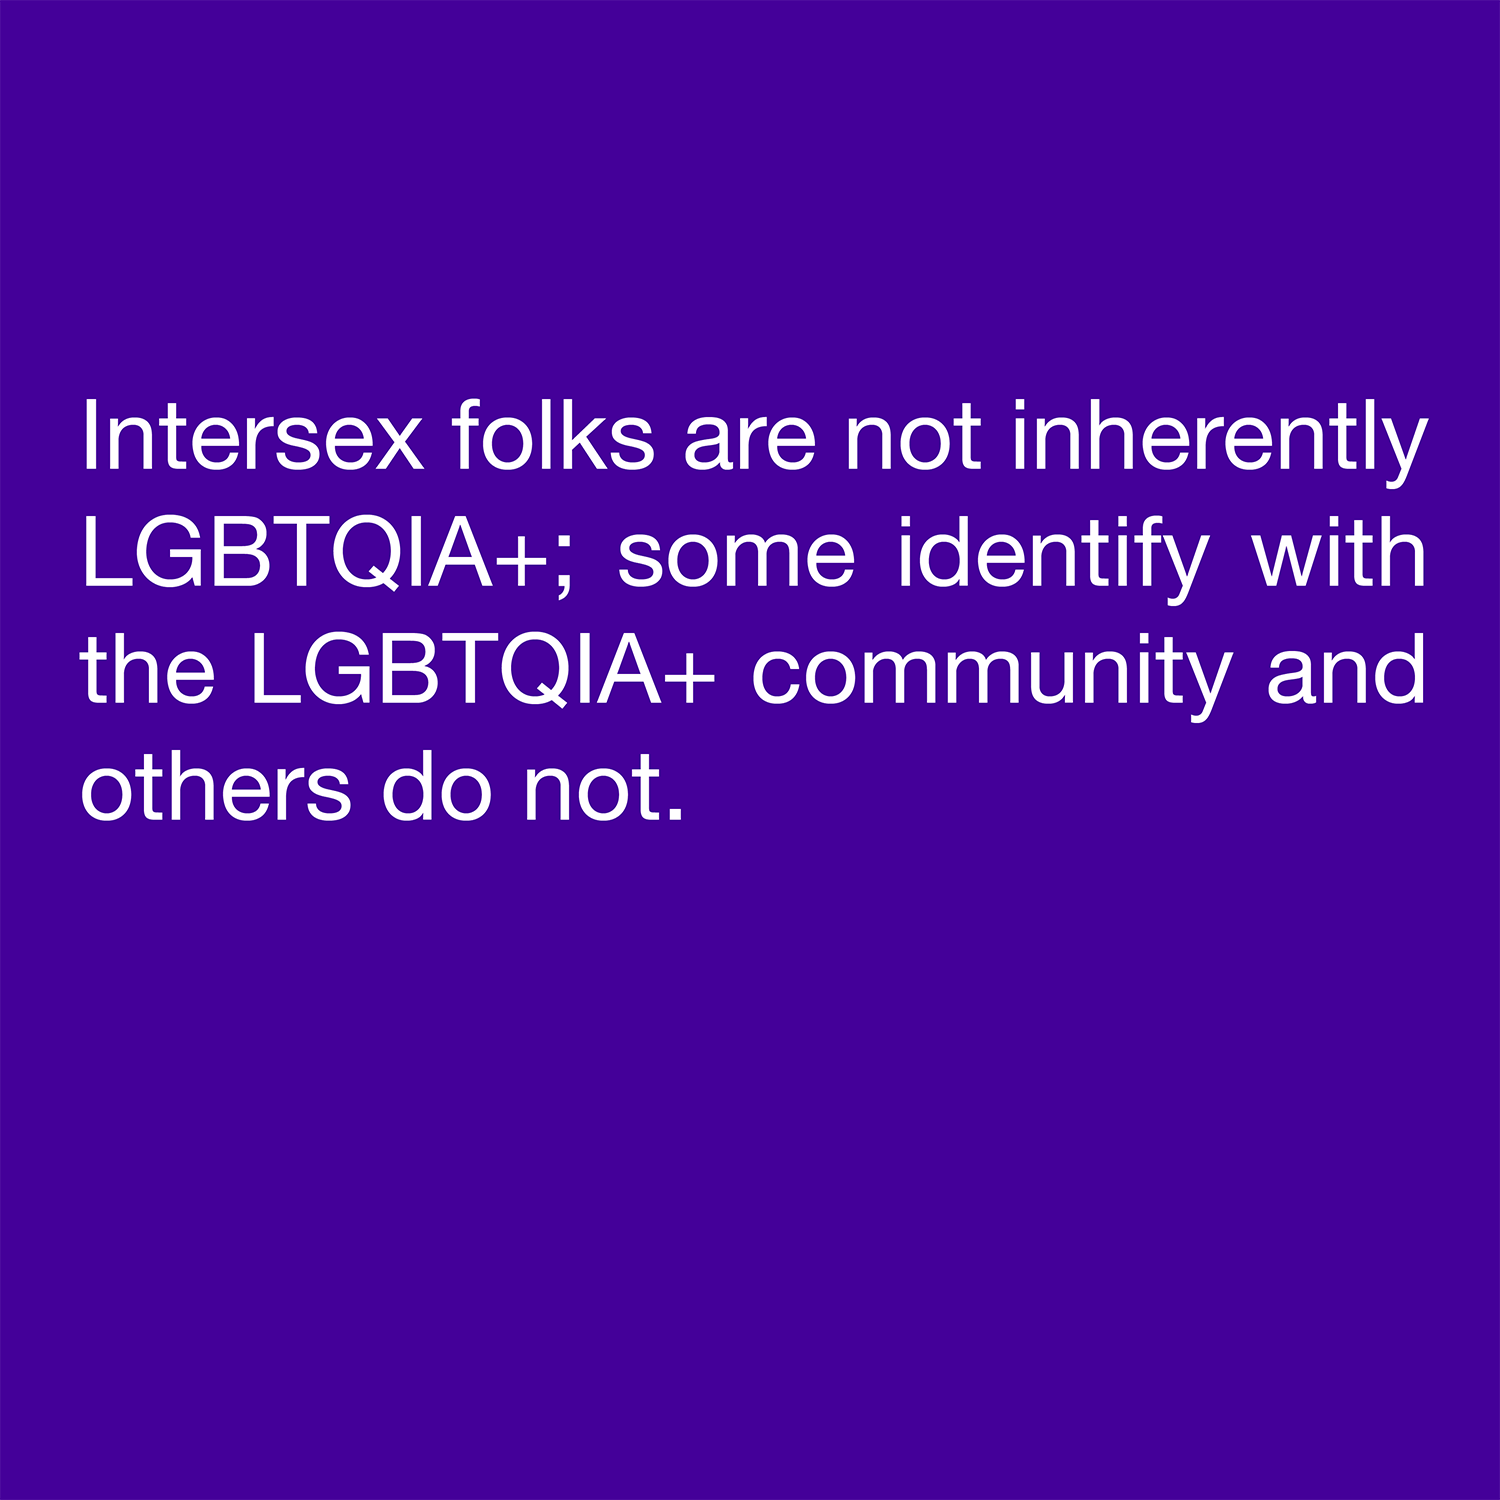  Intersex folks are not inherently LGBTQIA+; some identify with the LGBTQIA+ community and others do not. 